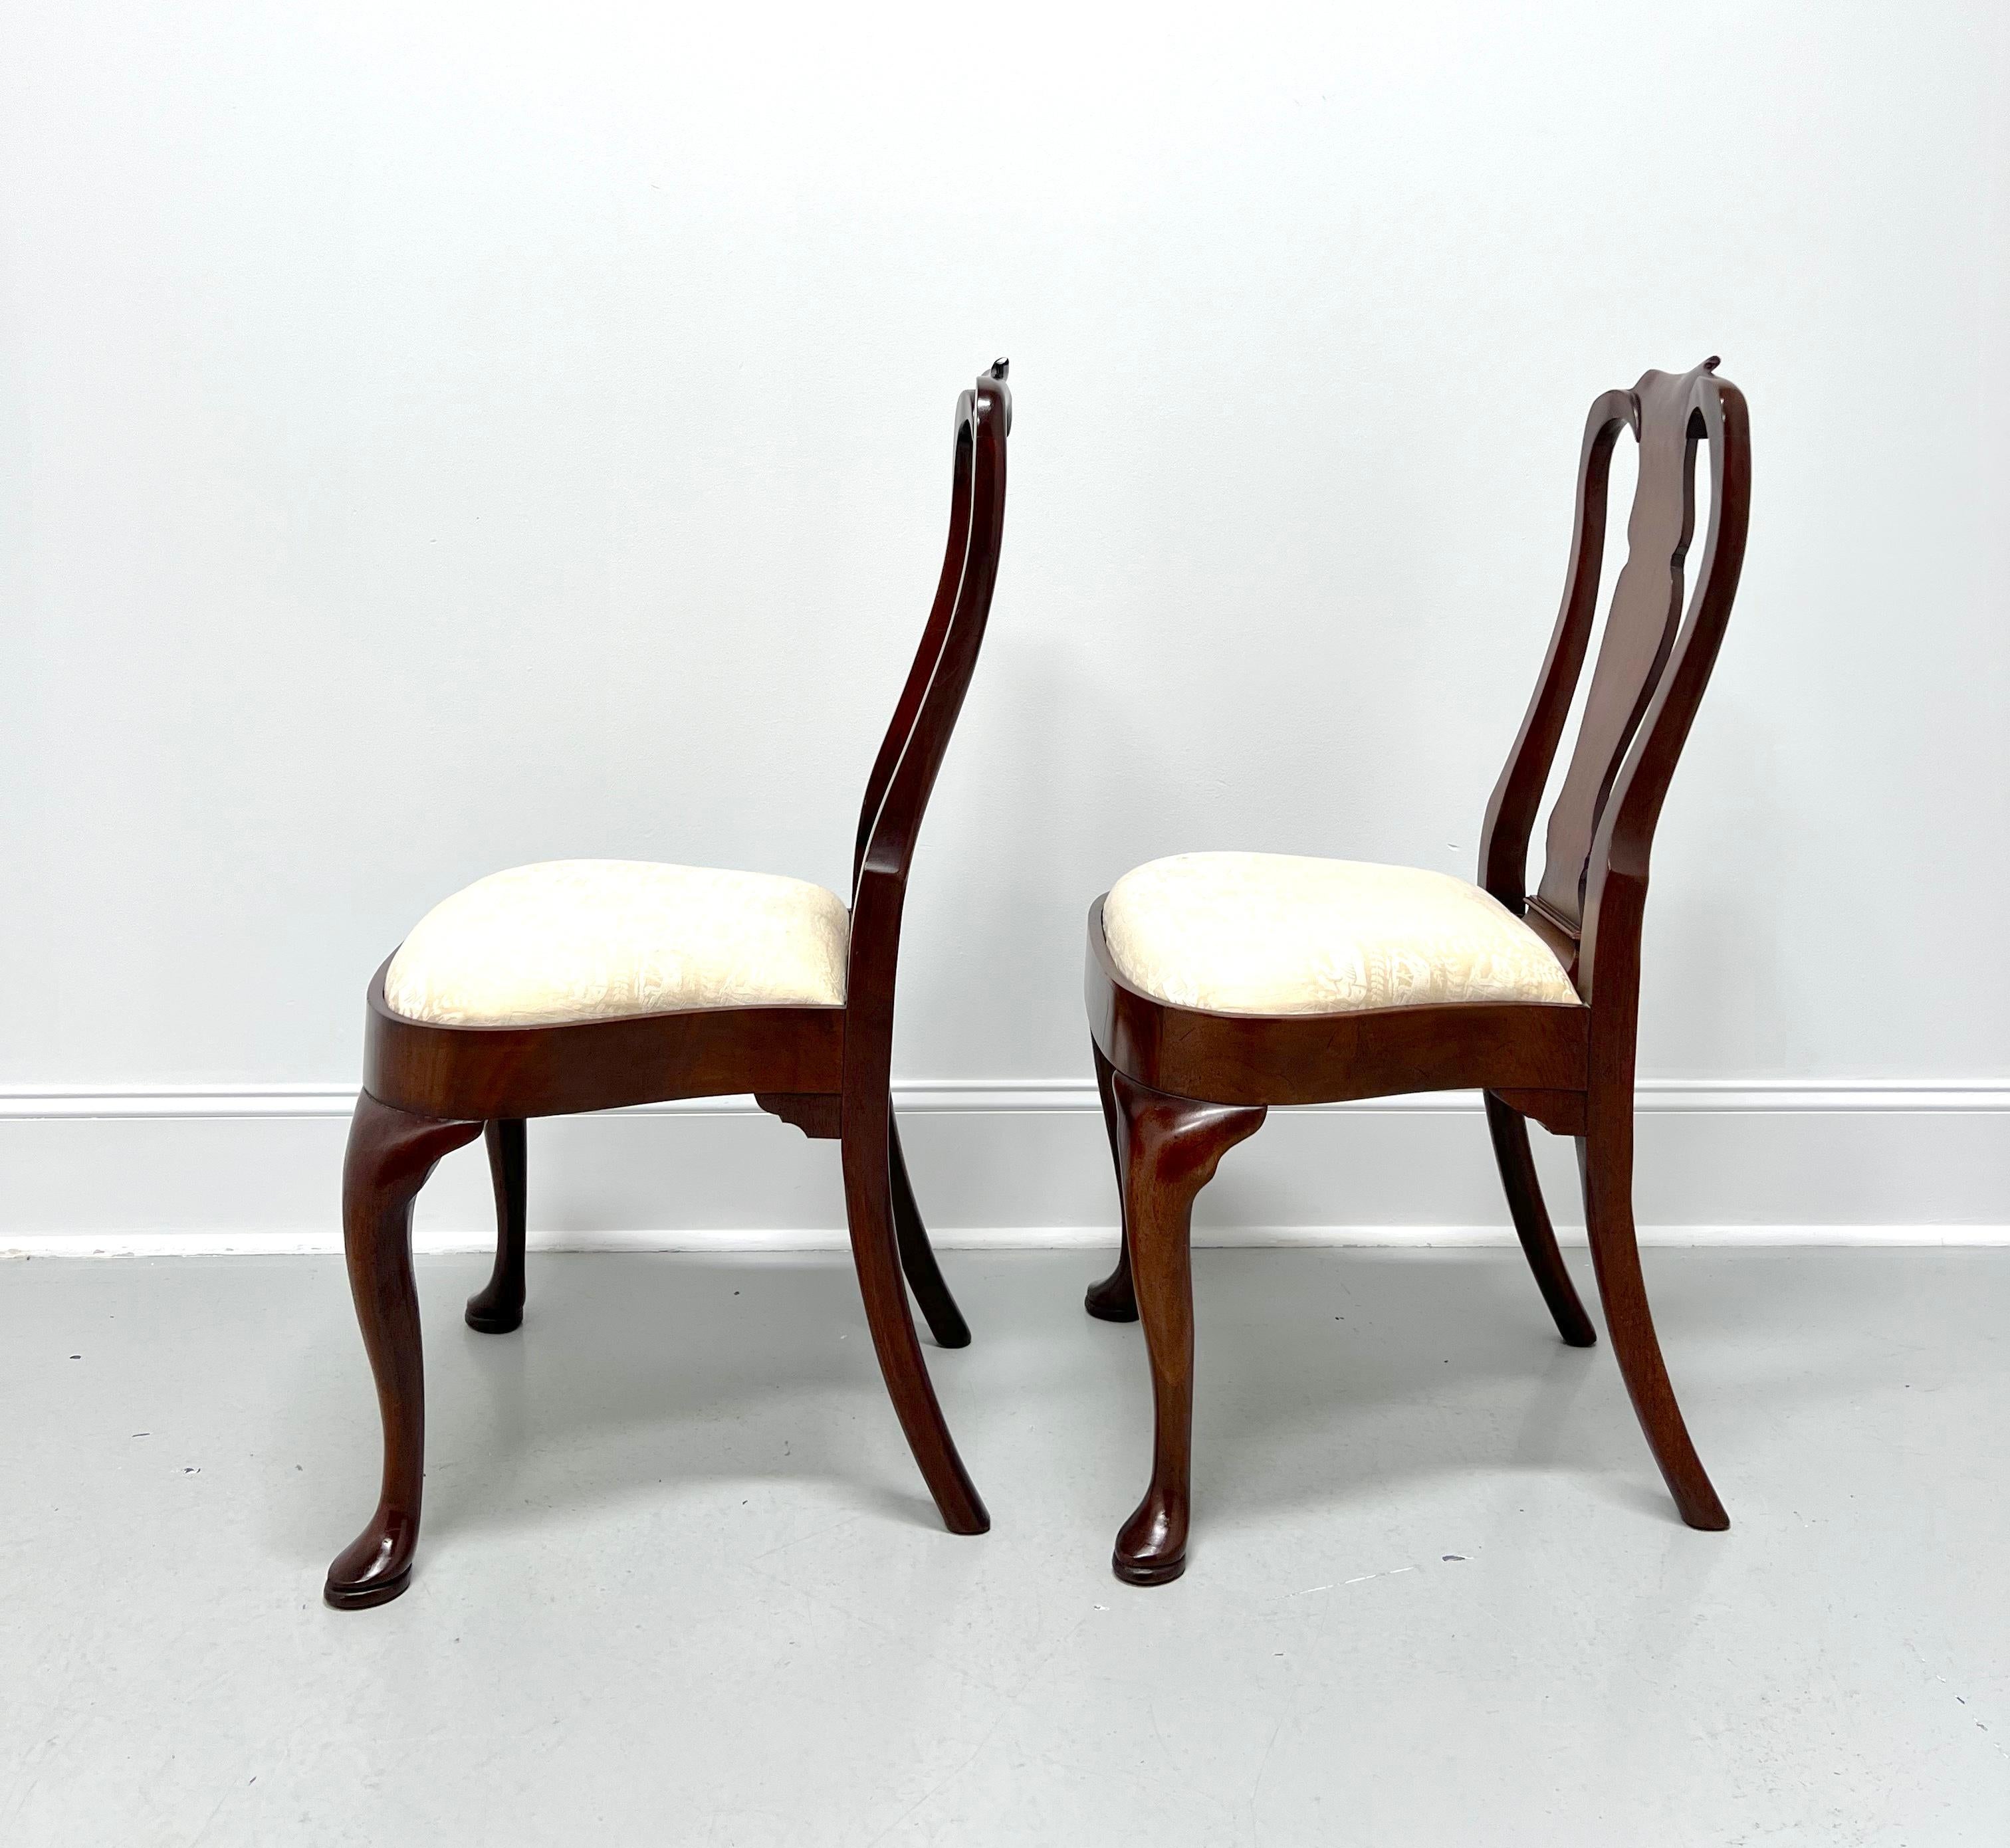 20th Century HICKORY CHAIR Mahogany Queen Anne Dining Side Chairs - Pair For Sale